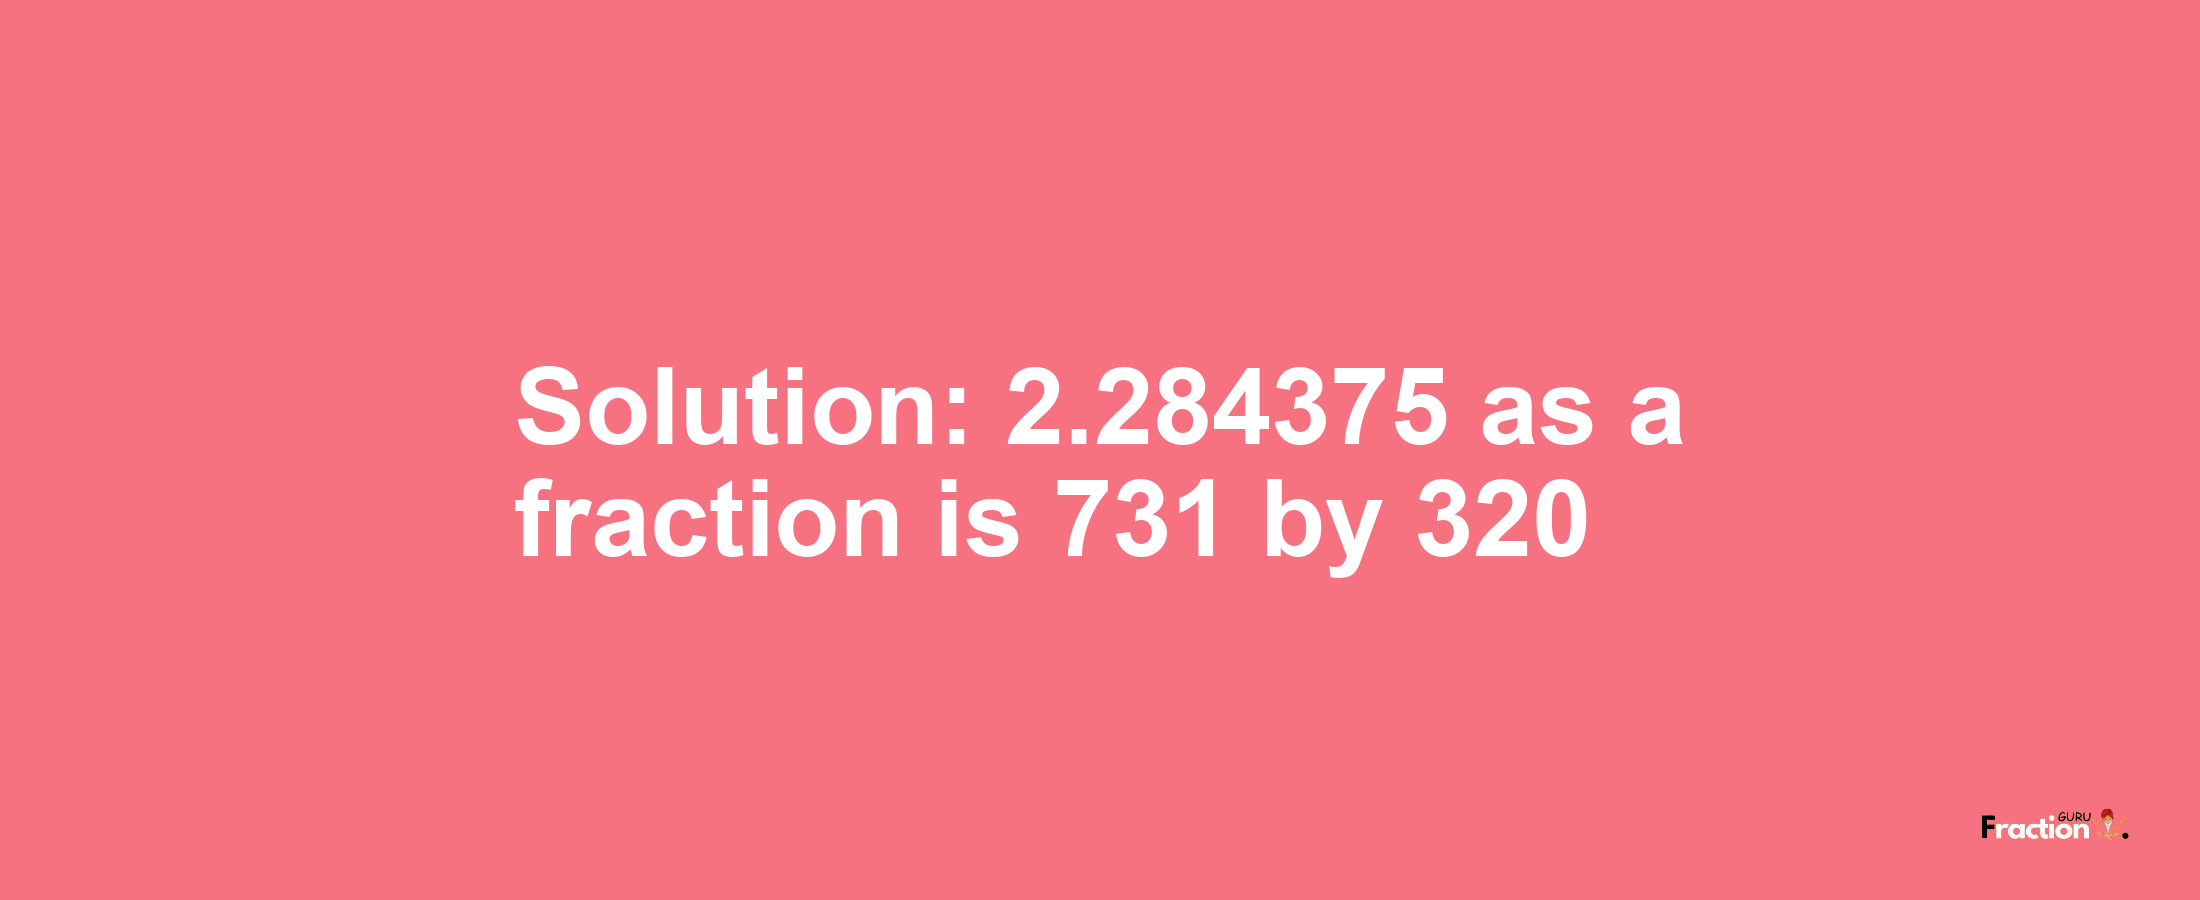 Solution:2.284375 as a fraction is 731/320